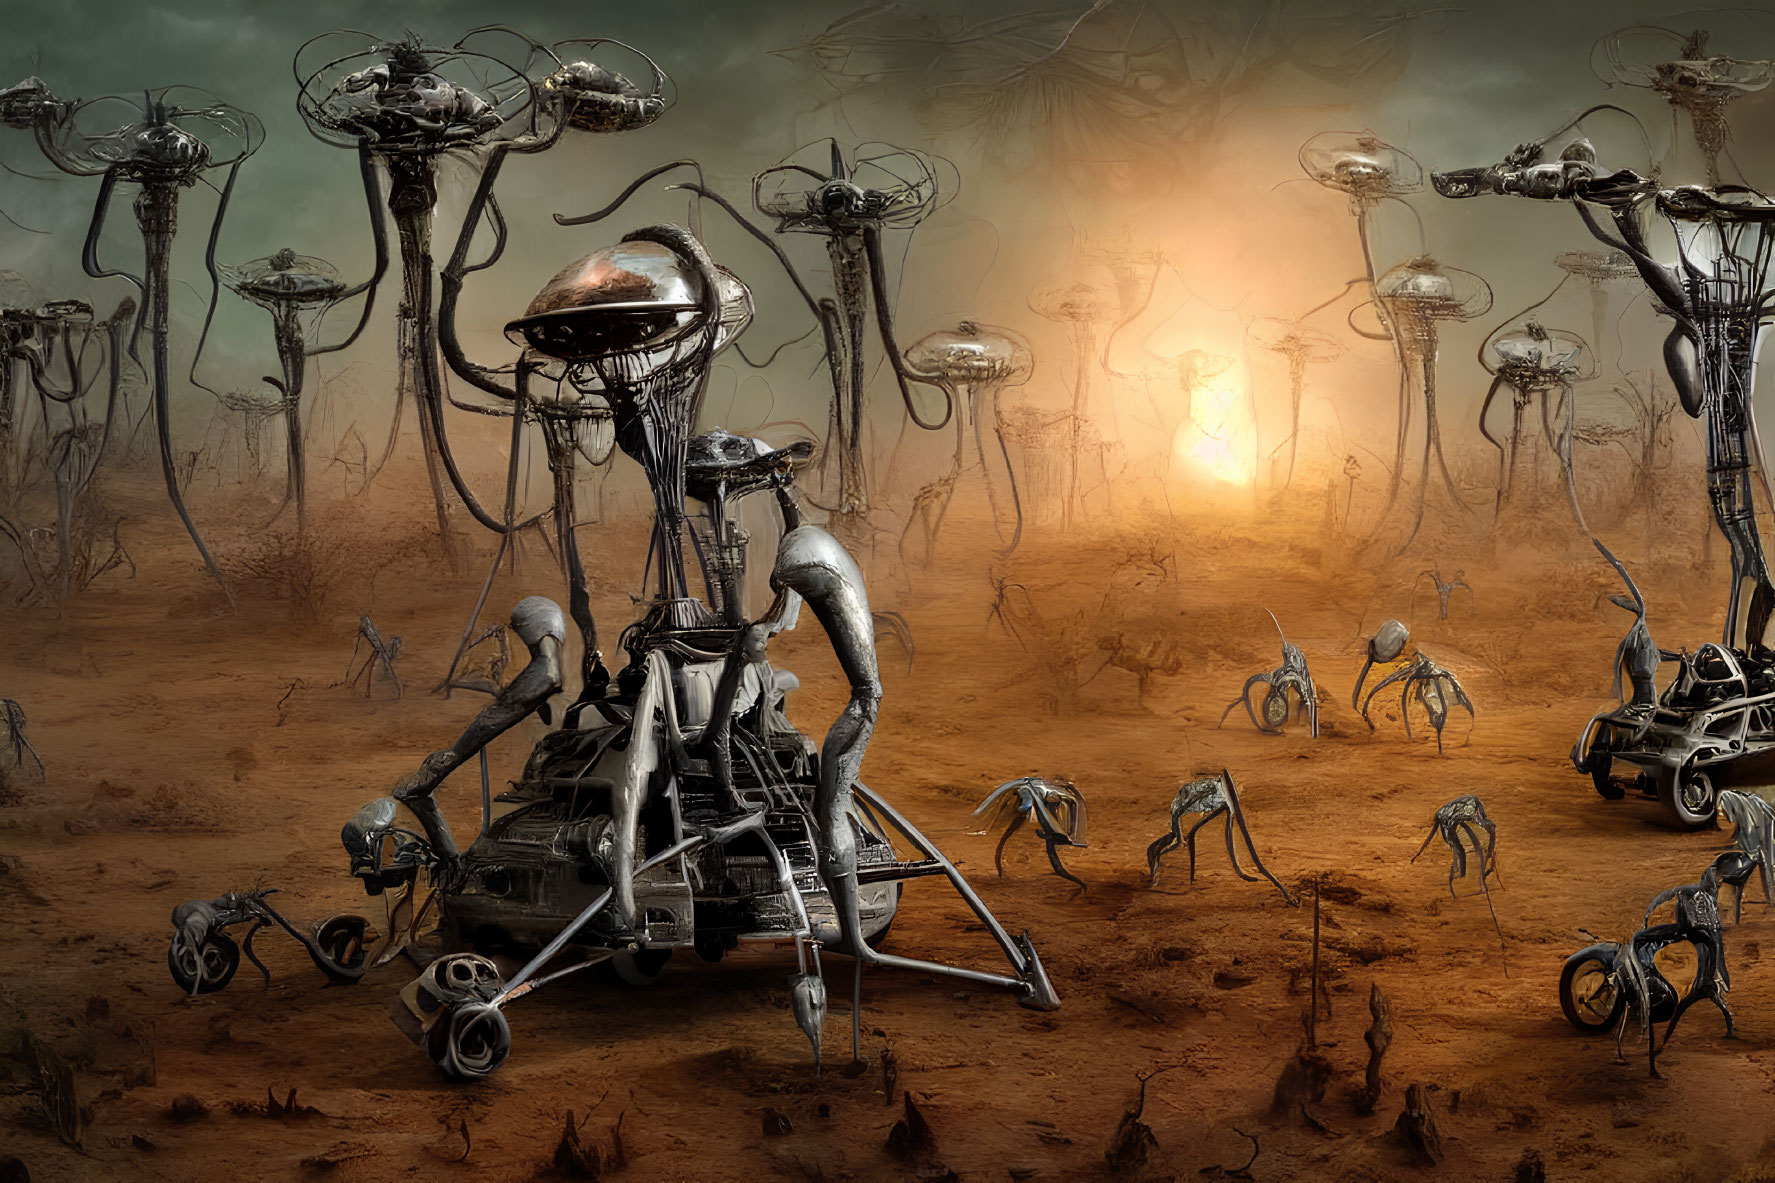 Desolate landscape with surreal mechanical creatures and structures under ominous sky